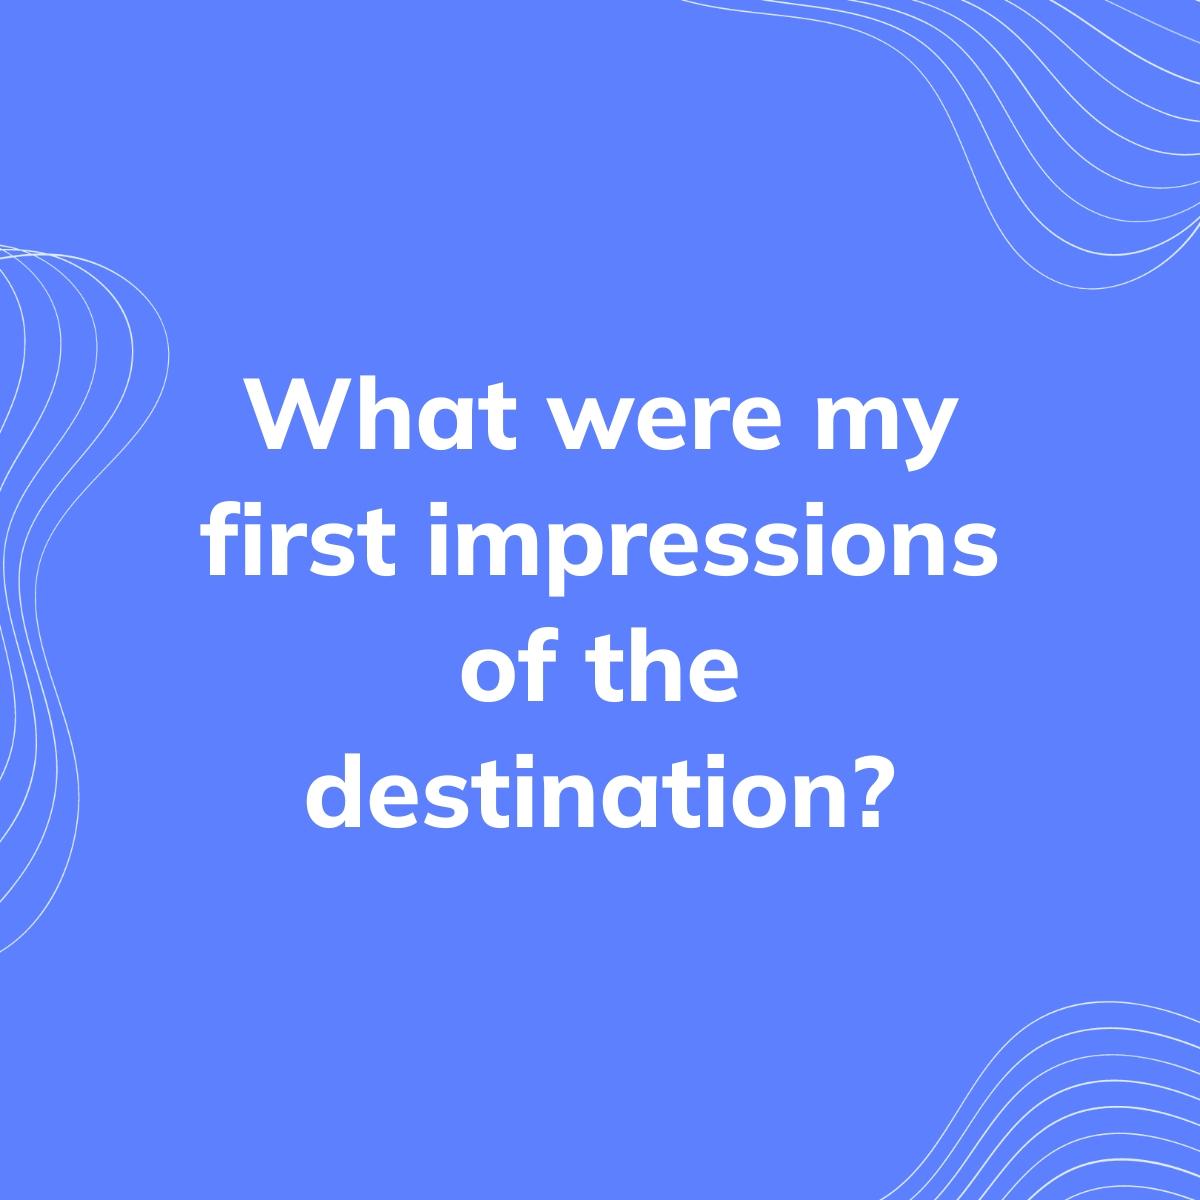 Journal Prompt: What were my first impressions of the destination?